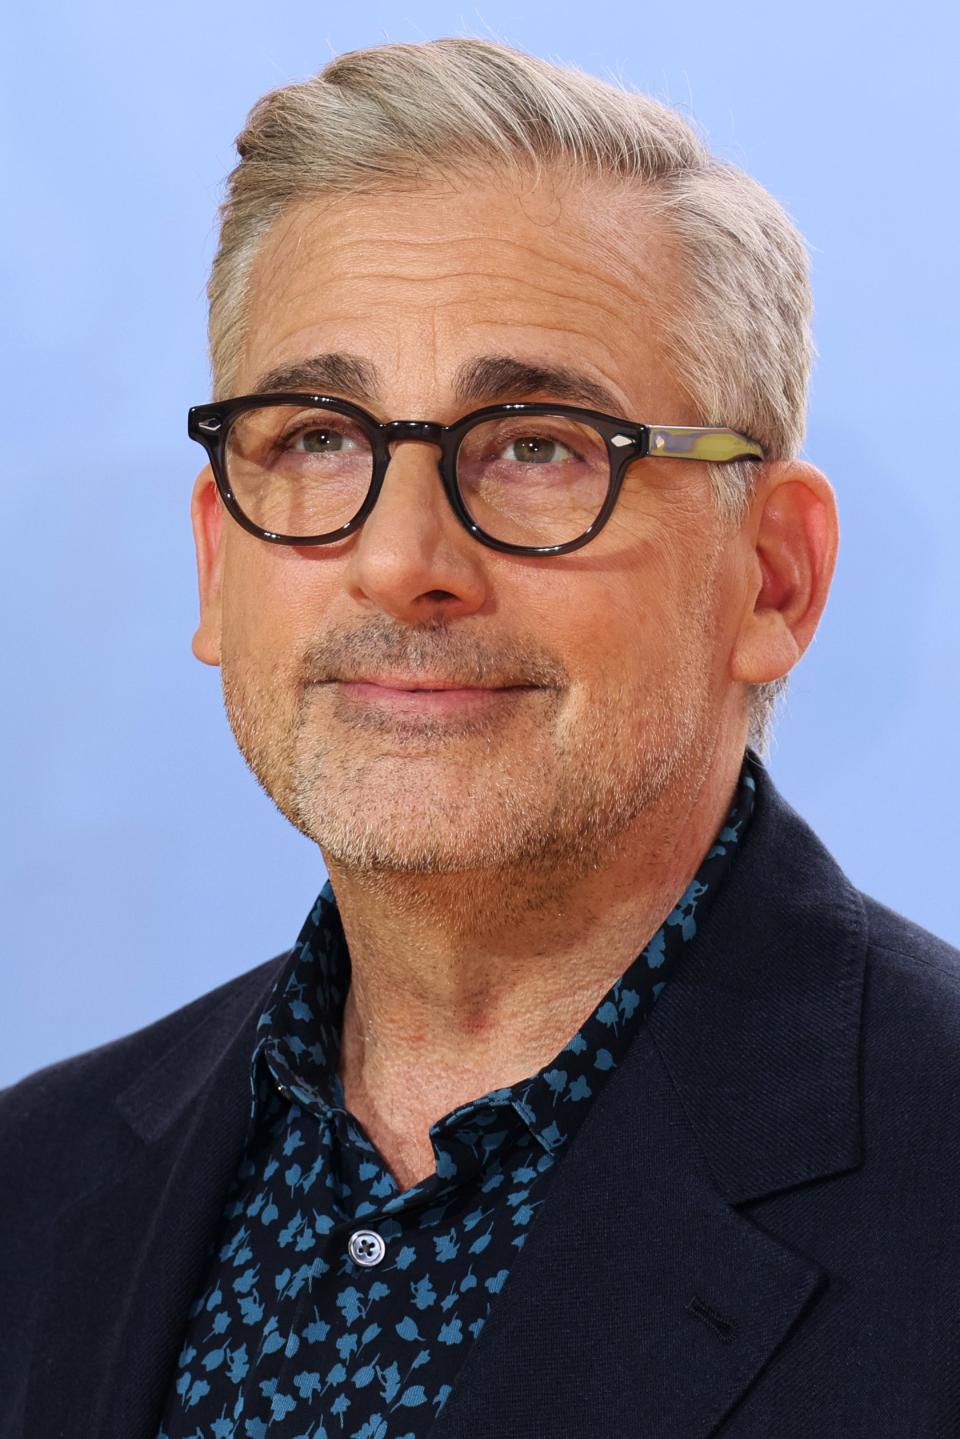 Steve Carell smiling, wearing glasses, a dark blazer, and a patterned shirt at the 